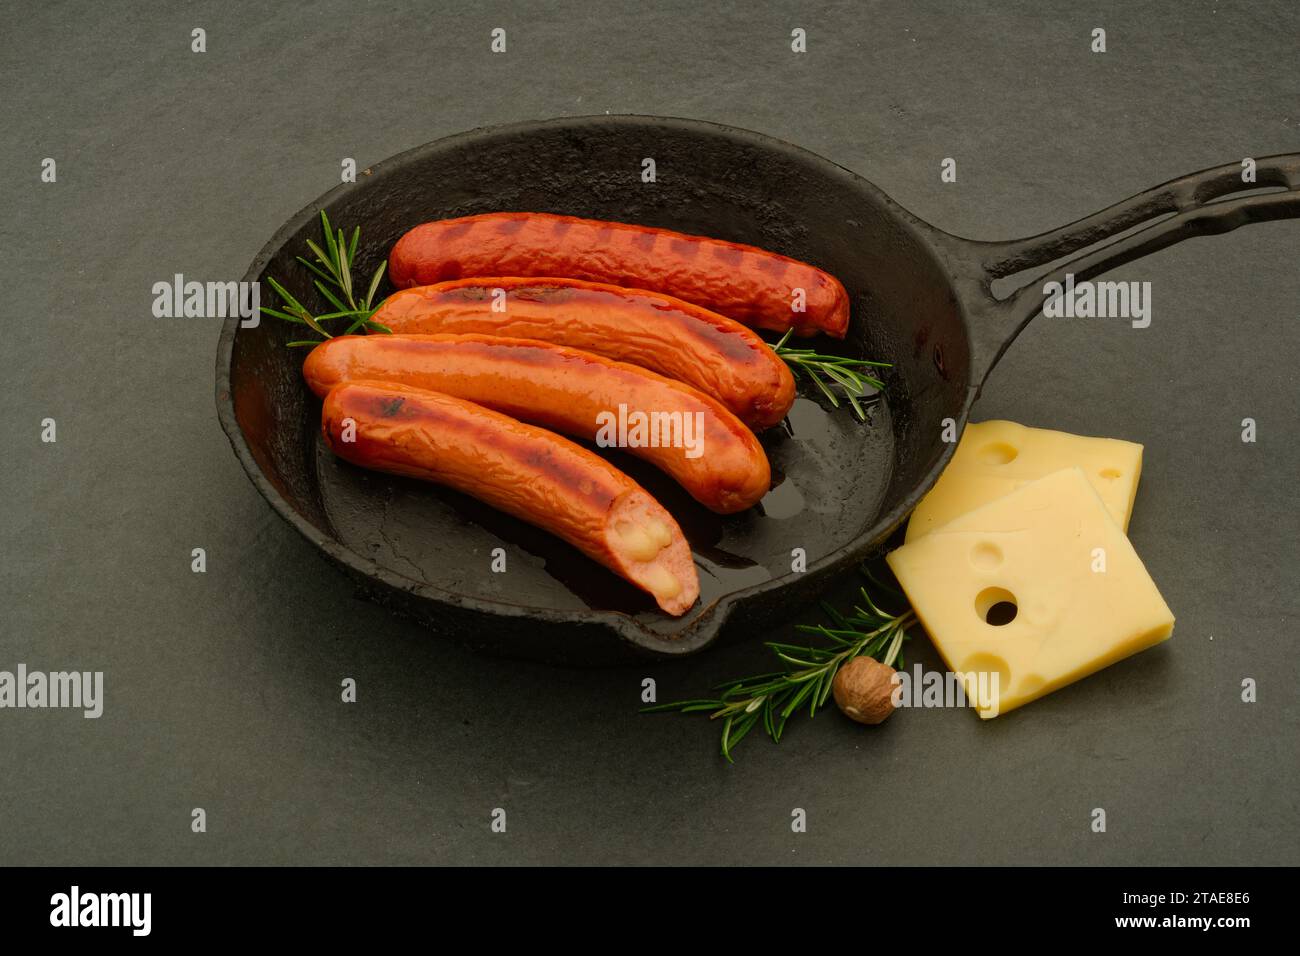 German sausages being cooked. With cheese and rosemary garnish. One sausage with cheese filling. Stock Photo